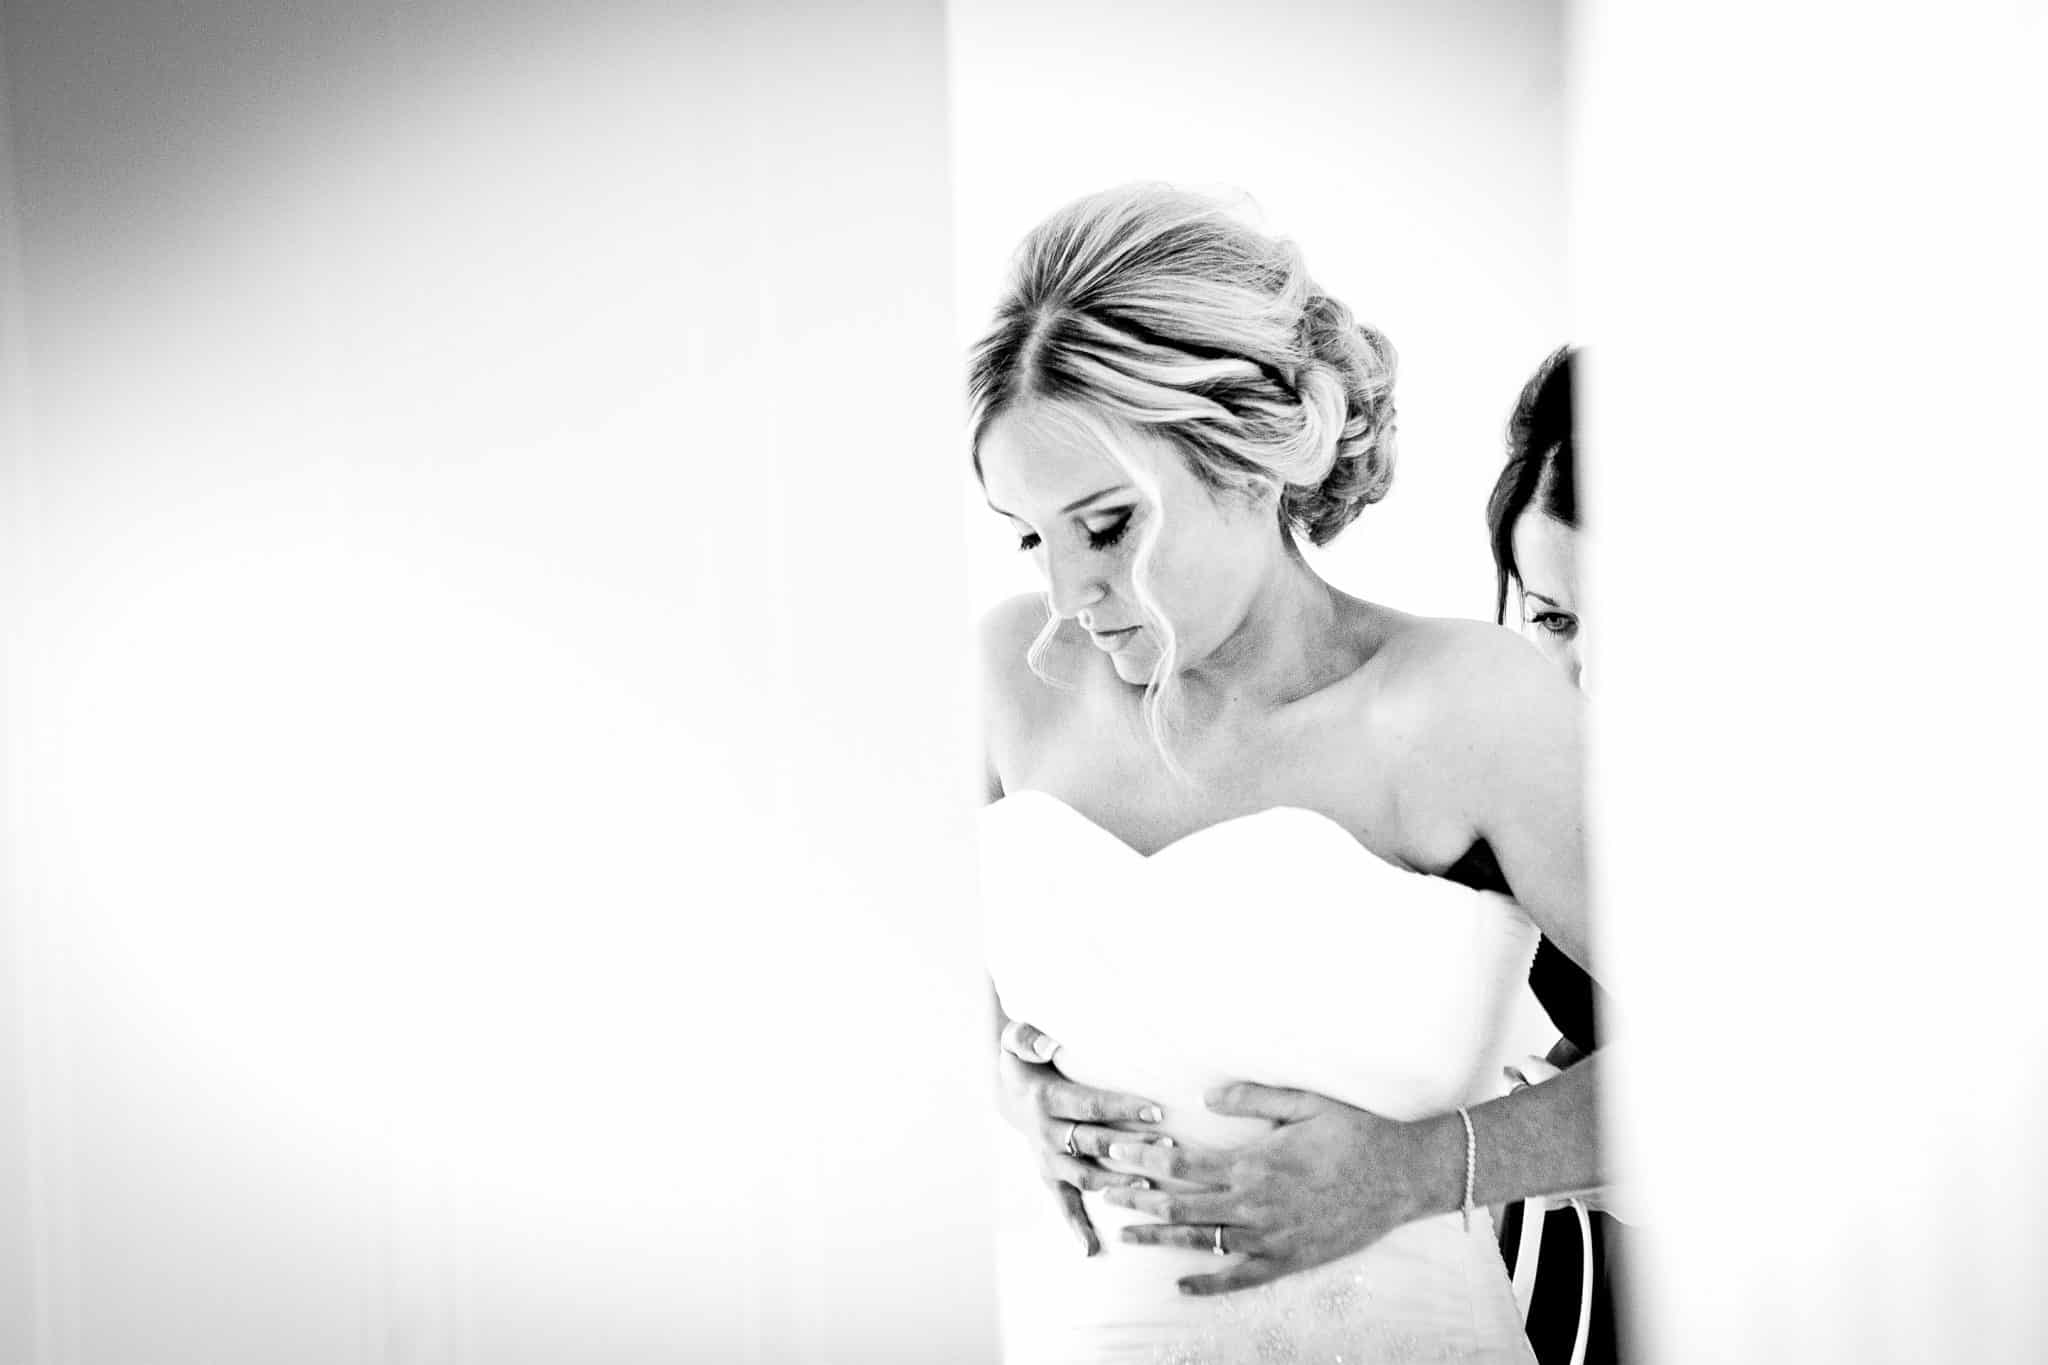 black and white wedding photography of the bride getting ready in Macclesfield Cheshire